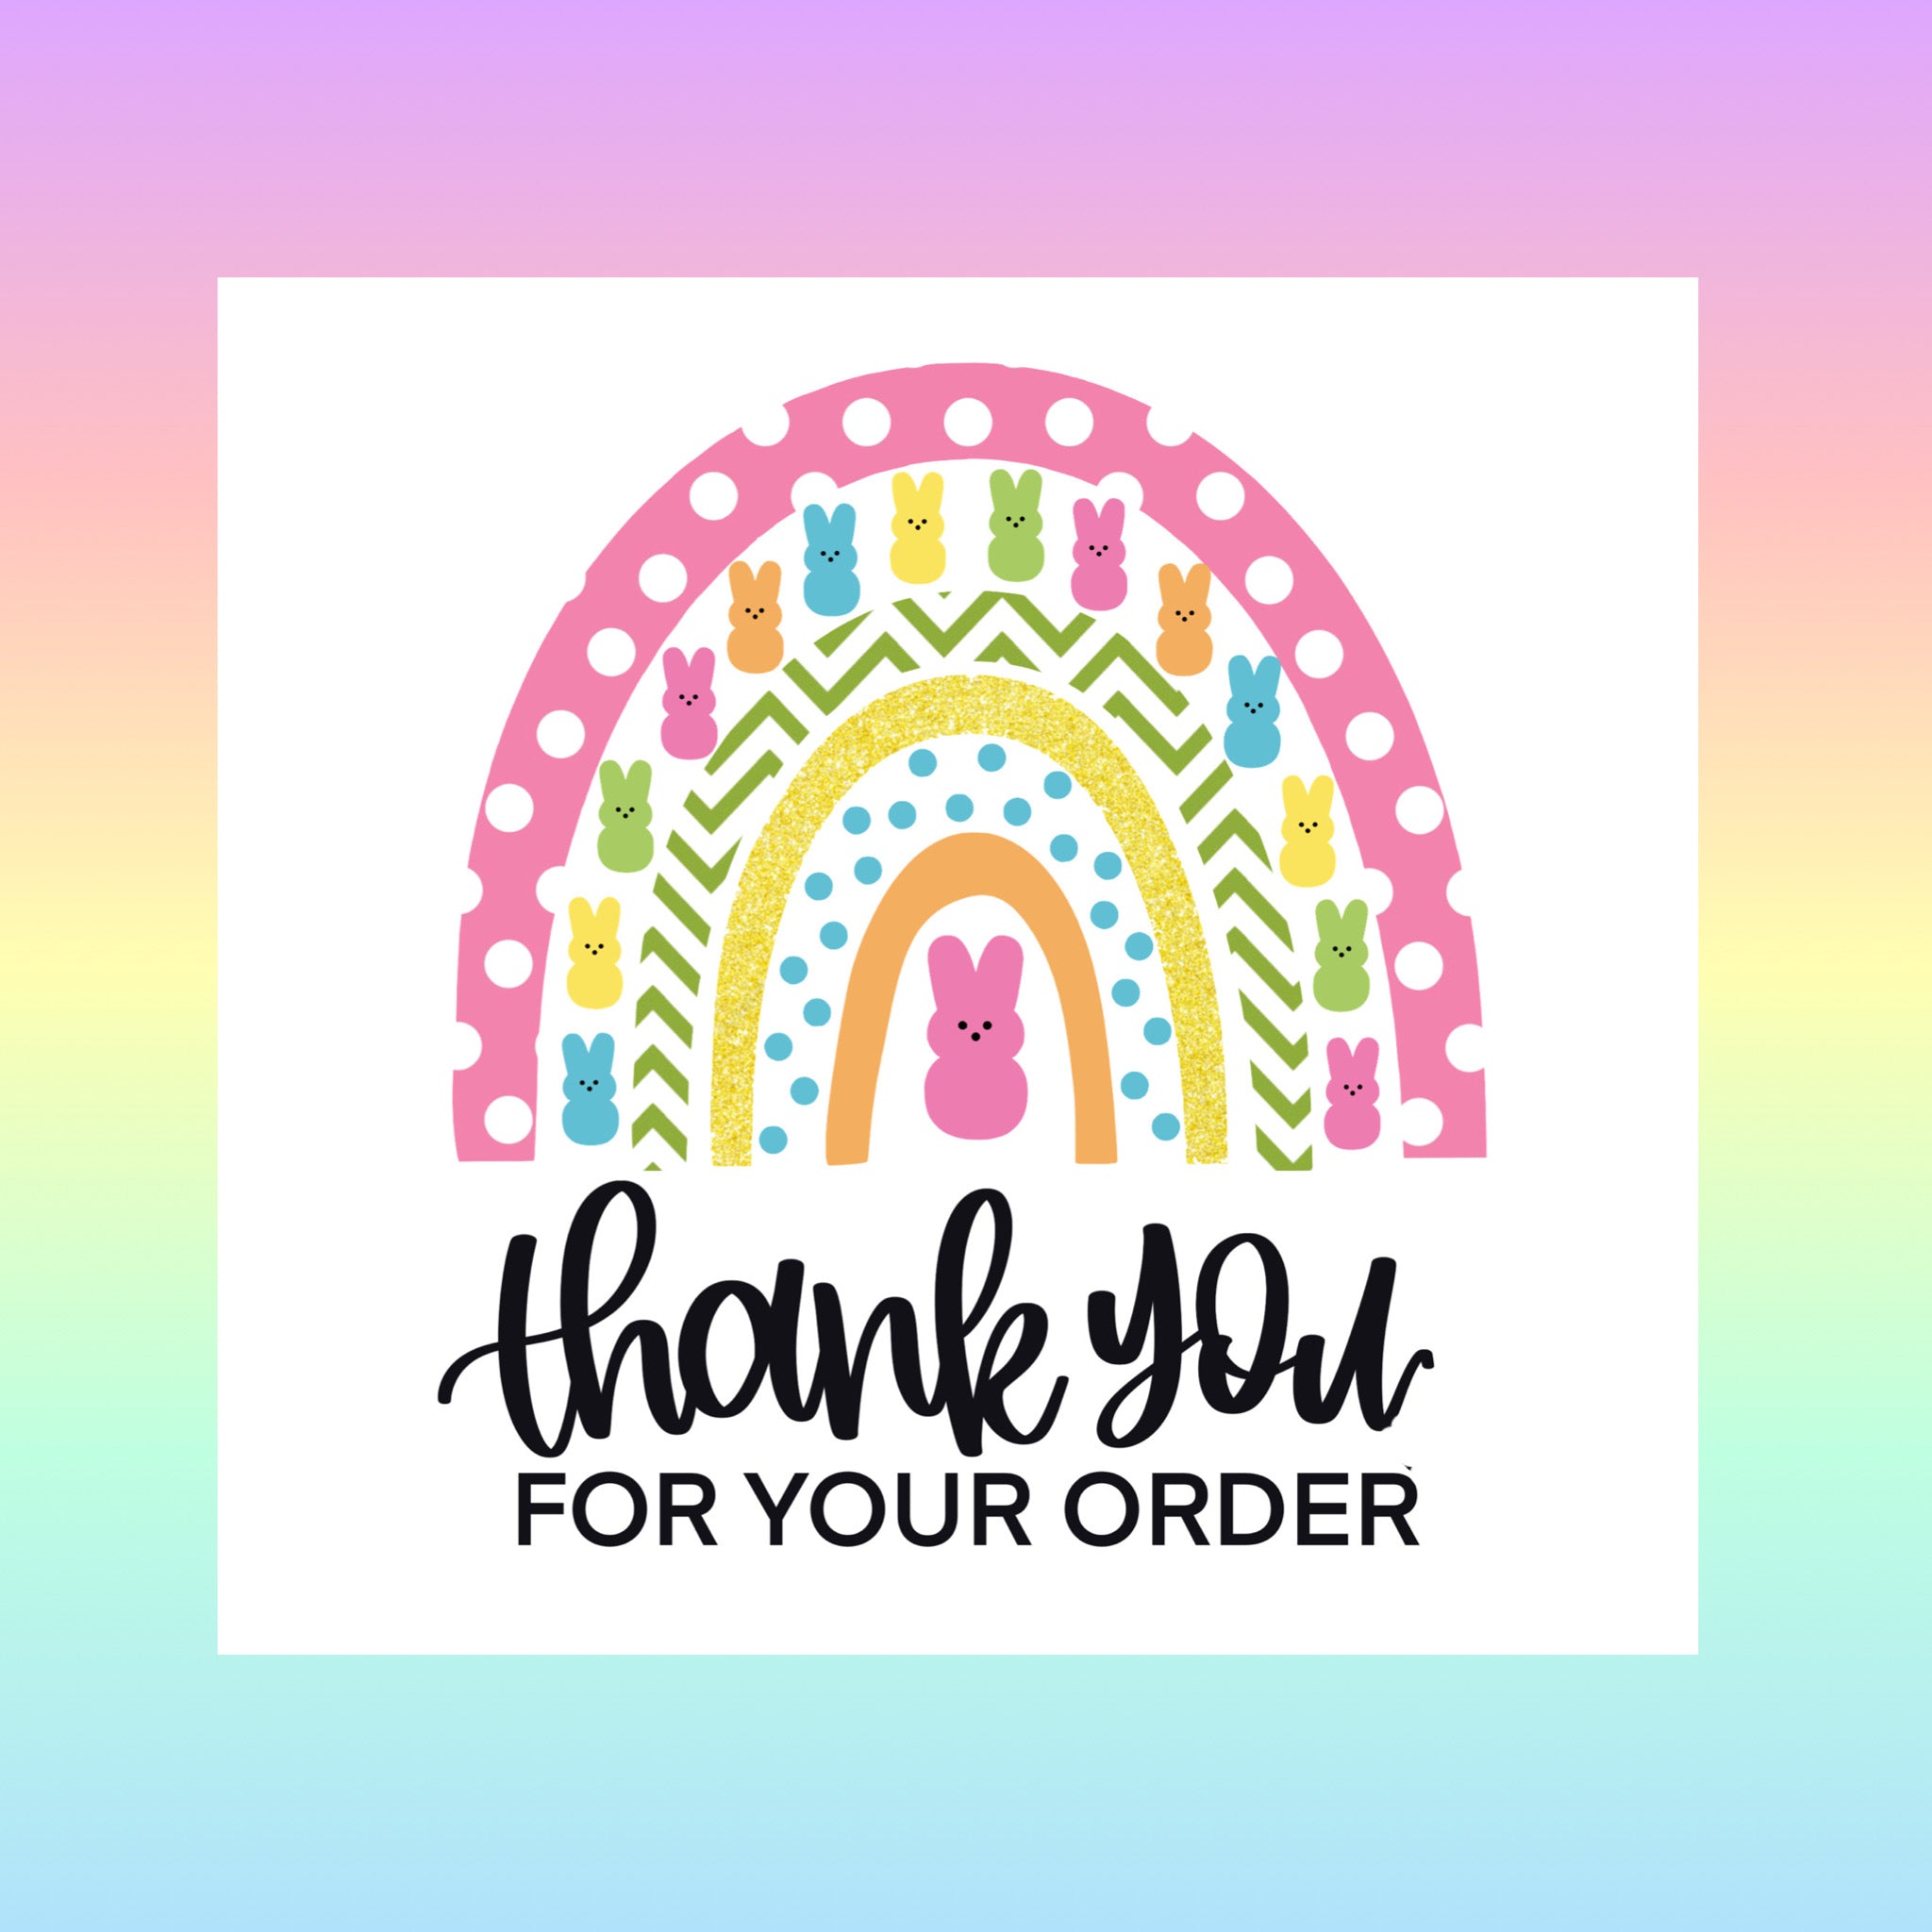 TGD Exclusive! Easter Bunny Peeps & Rainbow Thank You for your order 2x2 Square Stickers, 25 stickers per pack